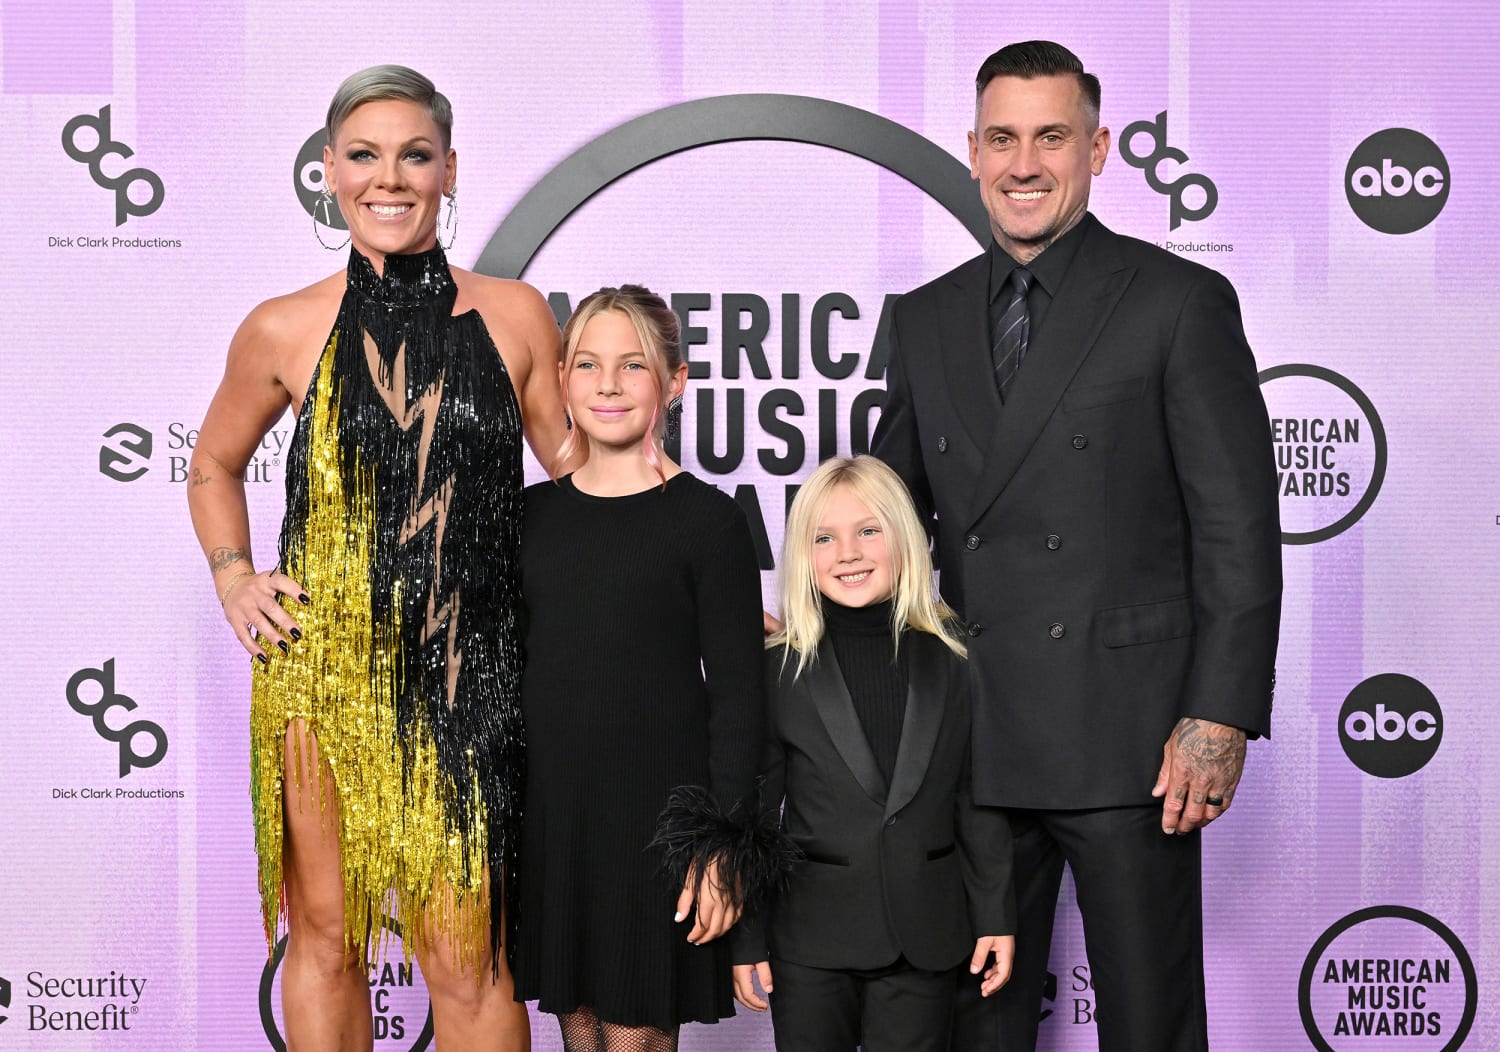 Pink, who is married to Carey Hart, 47, is a mother to Jameson, 6, and Willow, 11